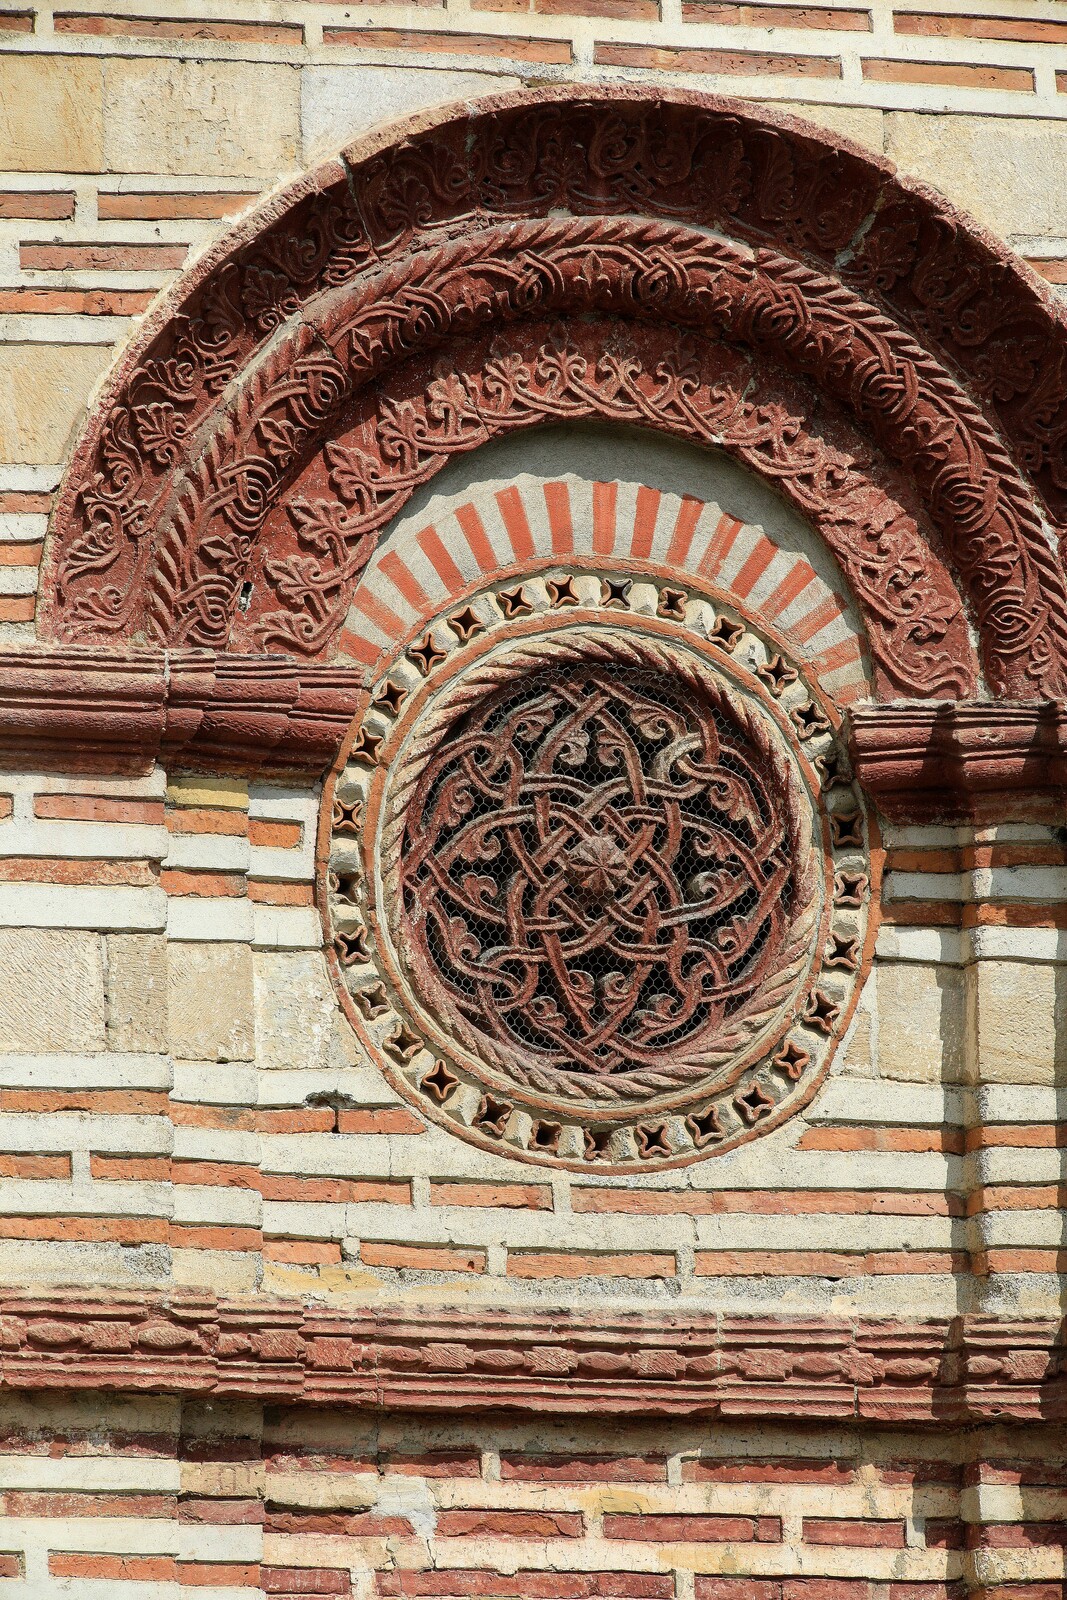 Archivolt and Rosette on the East Part of the South Wall